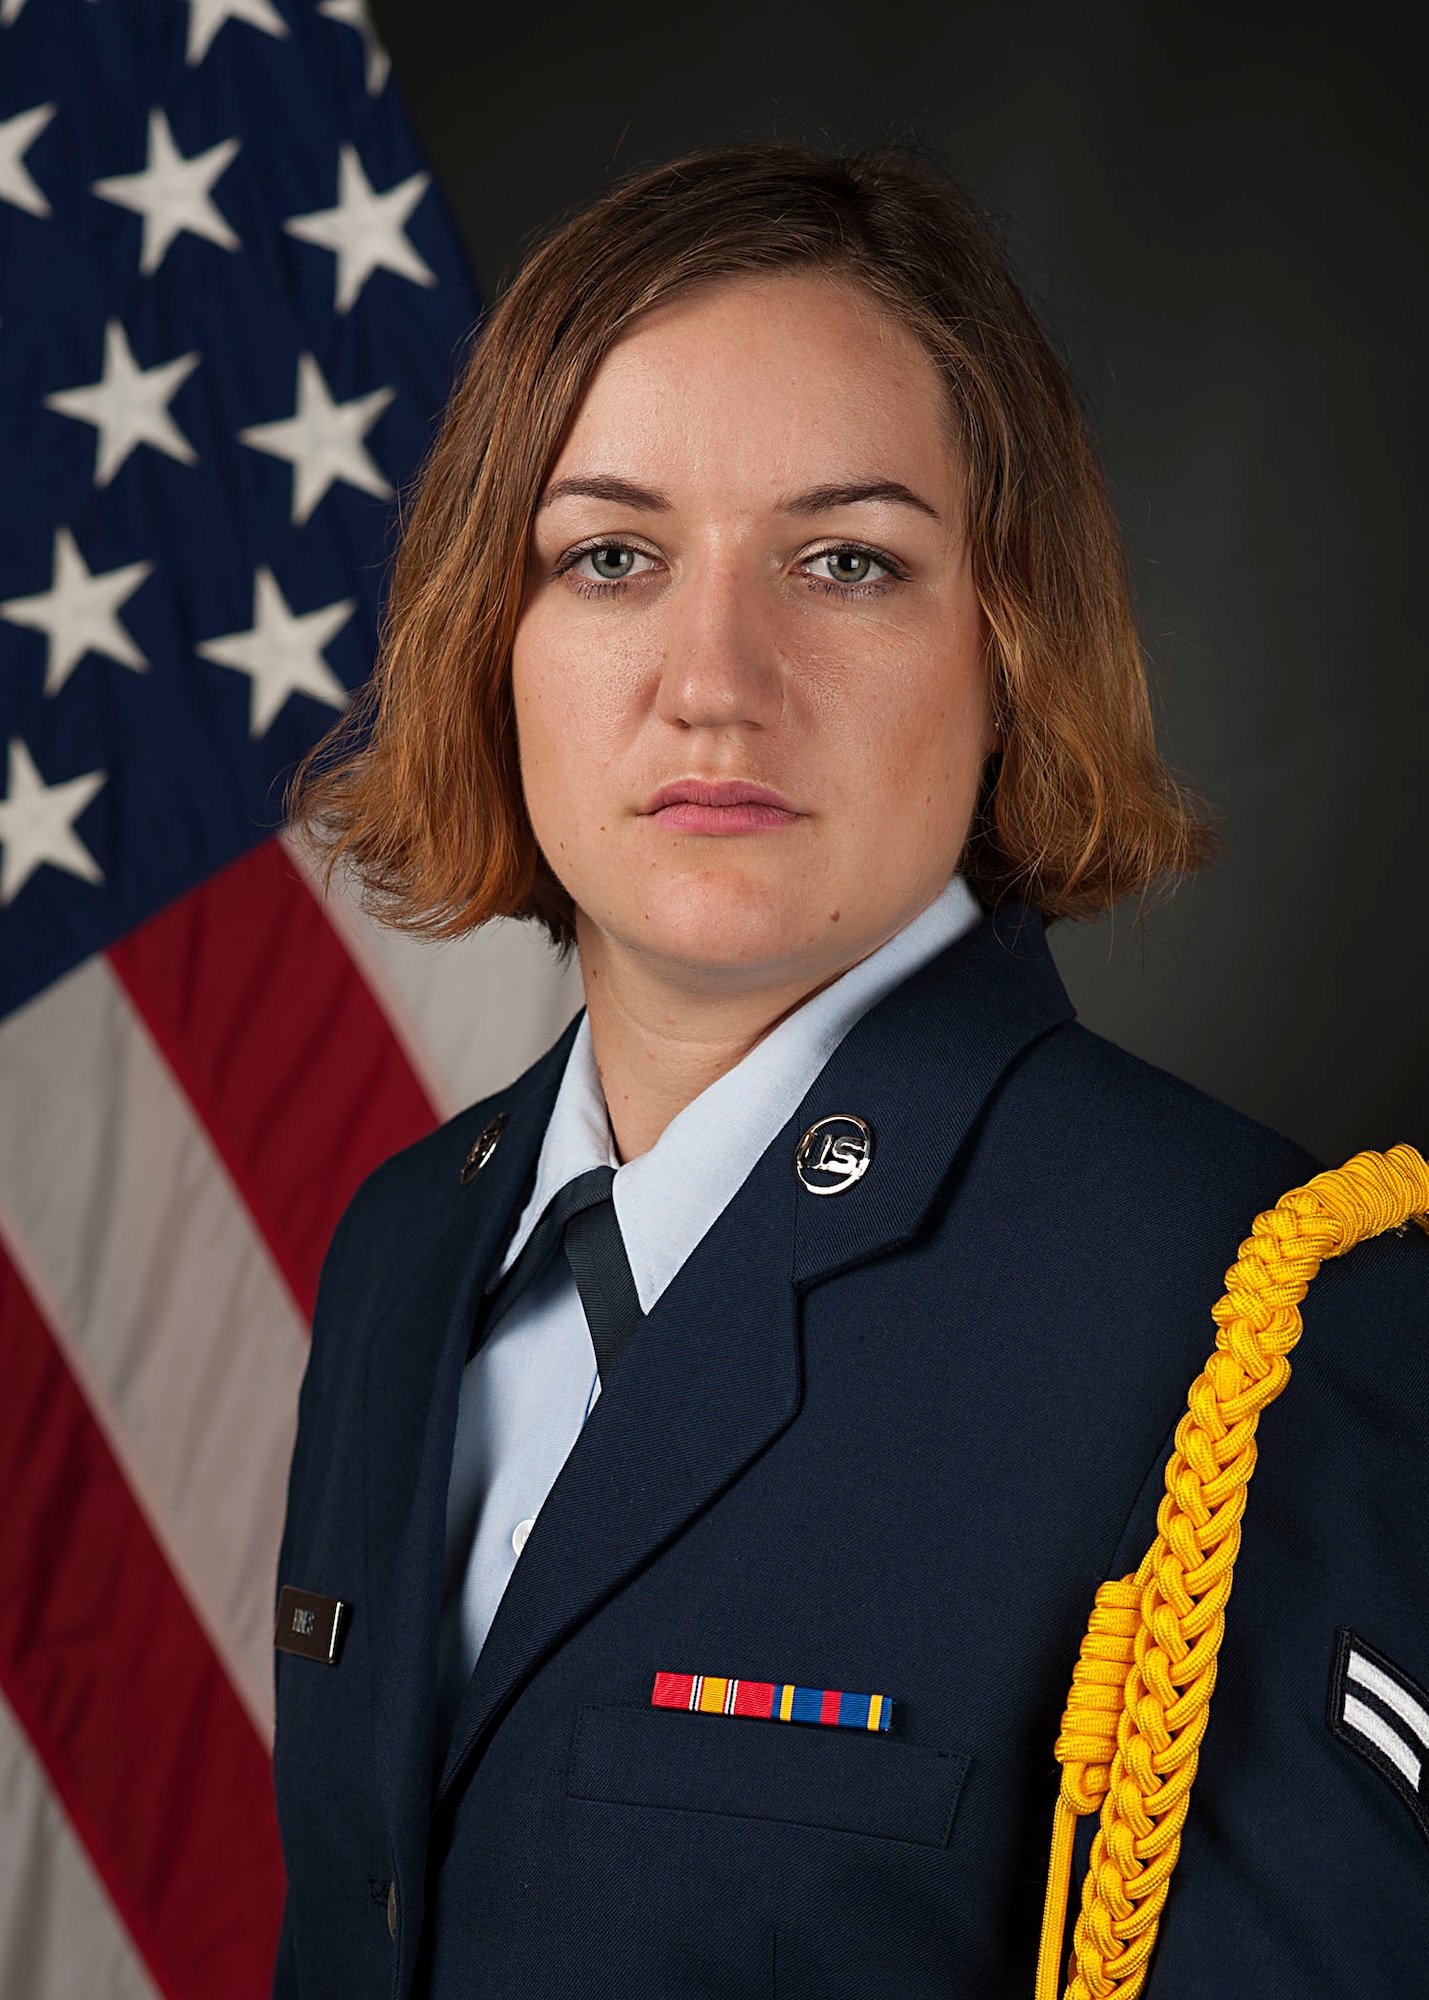 A portrait taken while in studio training at the Defense Information School, Fort George G. Meade, Maryland. (Courtesy photo)